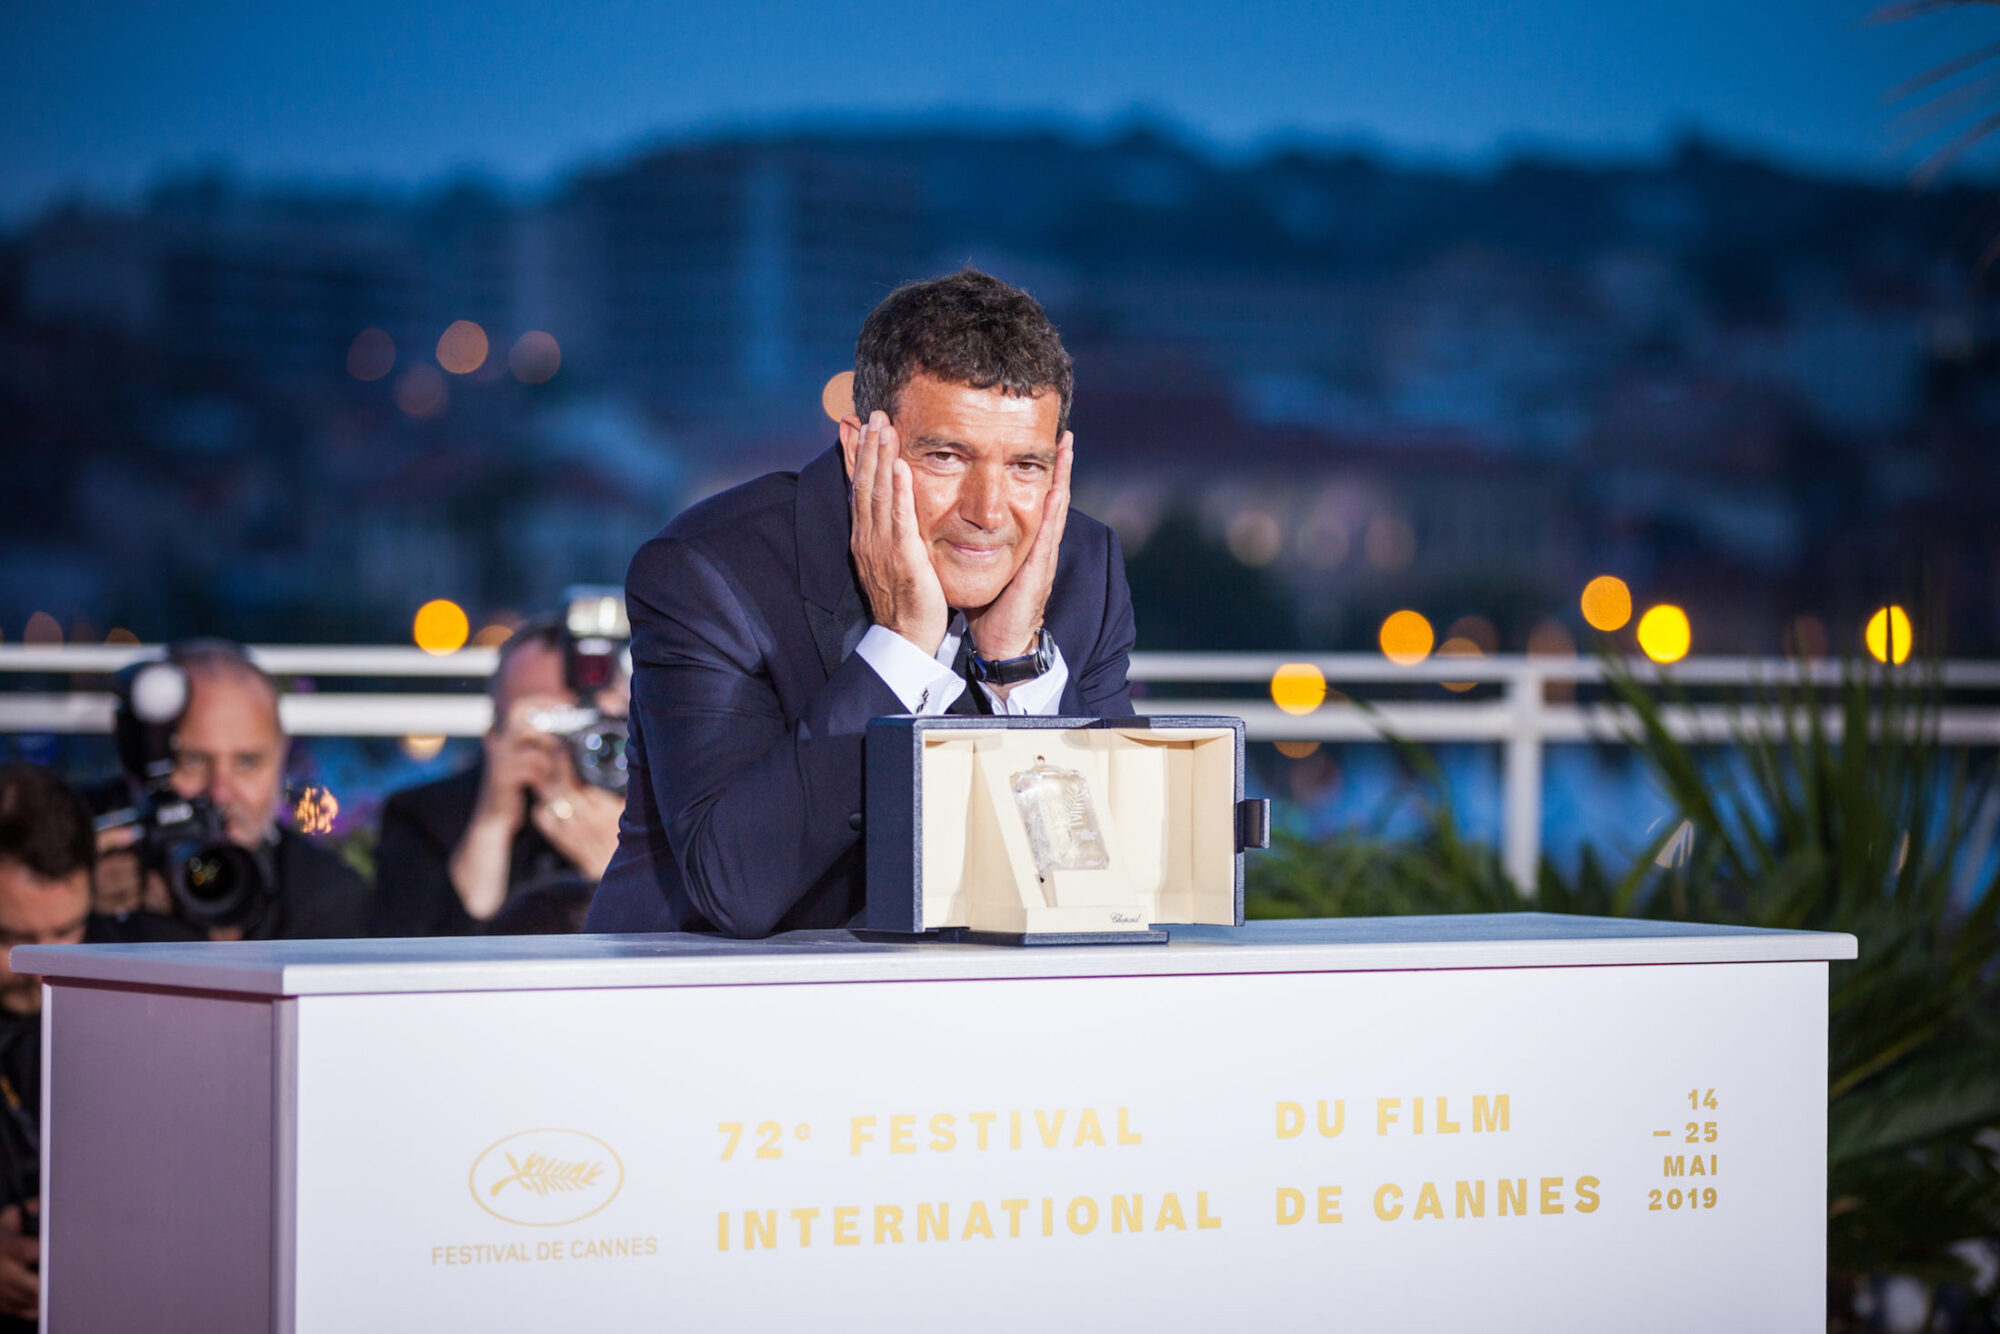 Antonio Banderas holds his trophy during a photocall on May 25, 2019 after he won the Best Actor Prize for "Dolor Y Gloria (Pain and Glory)"